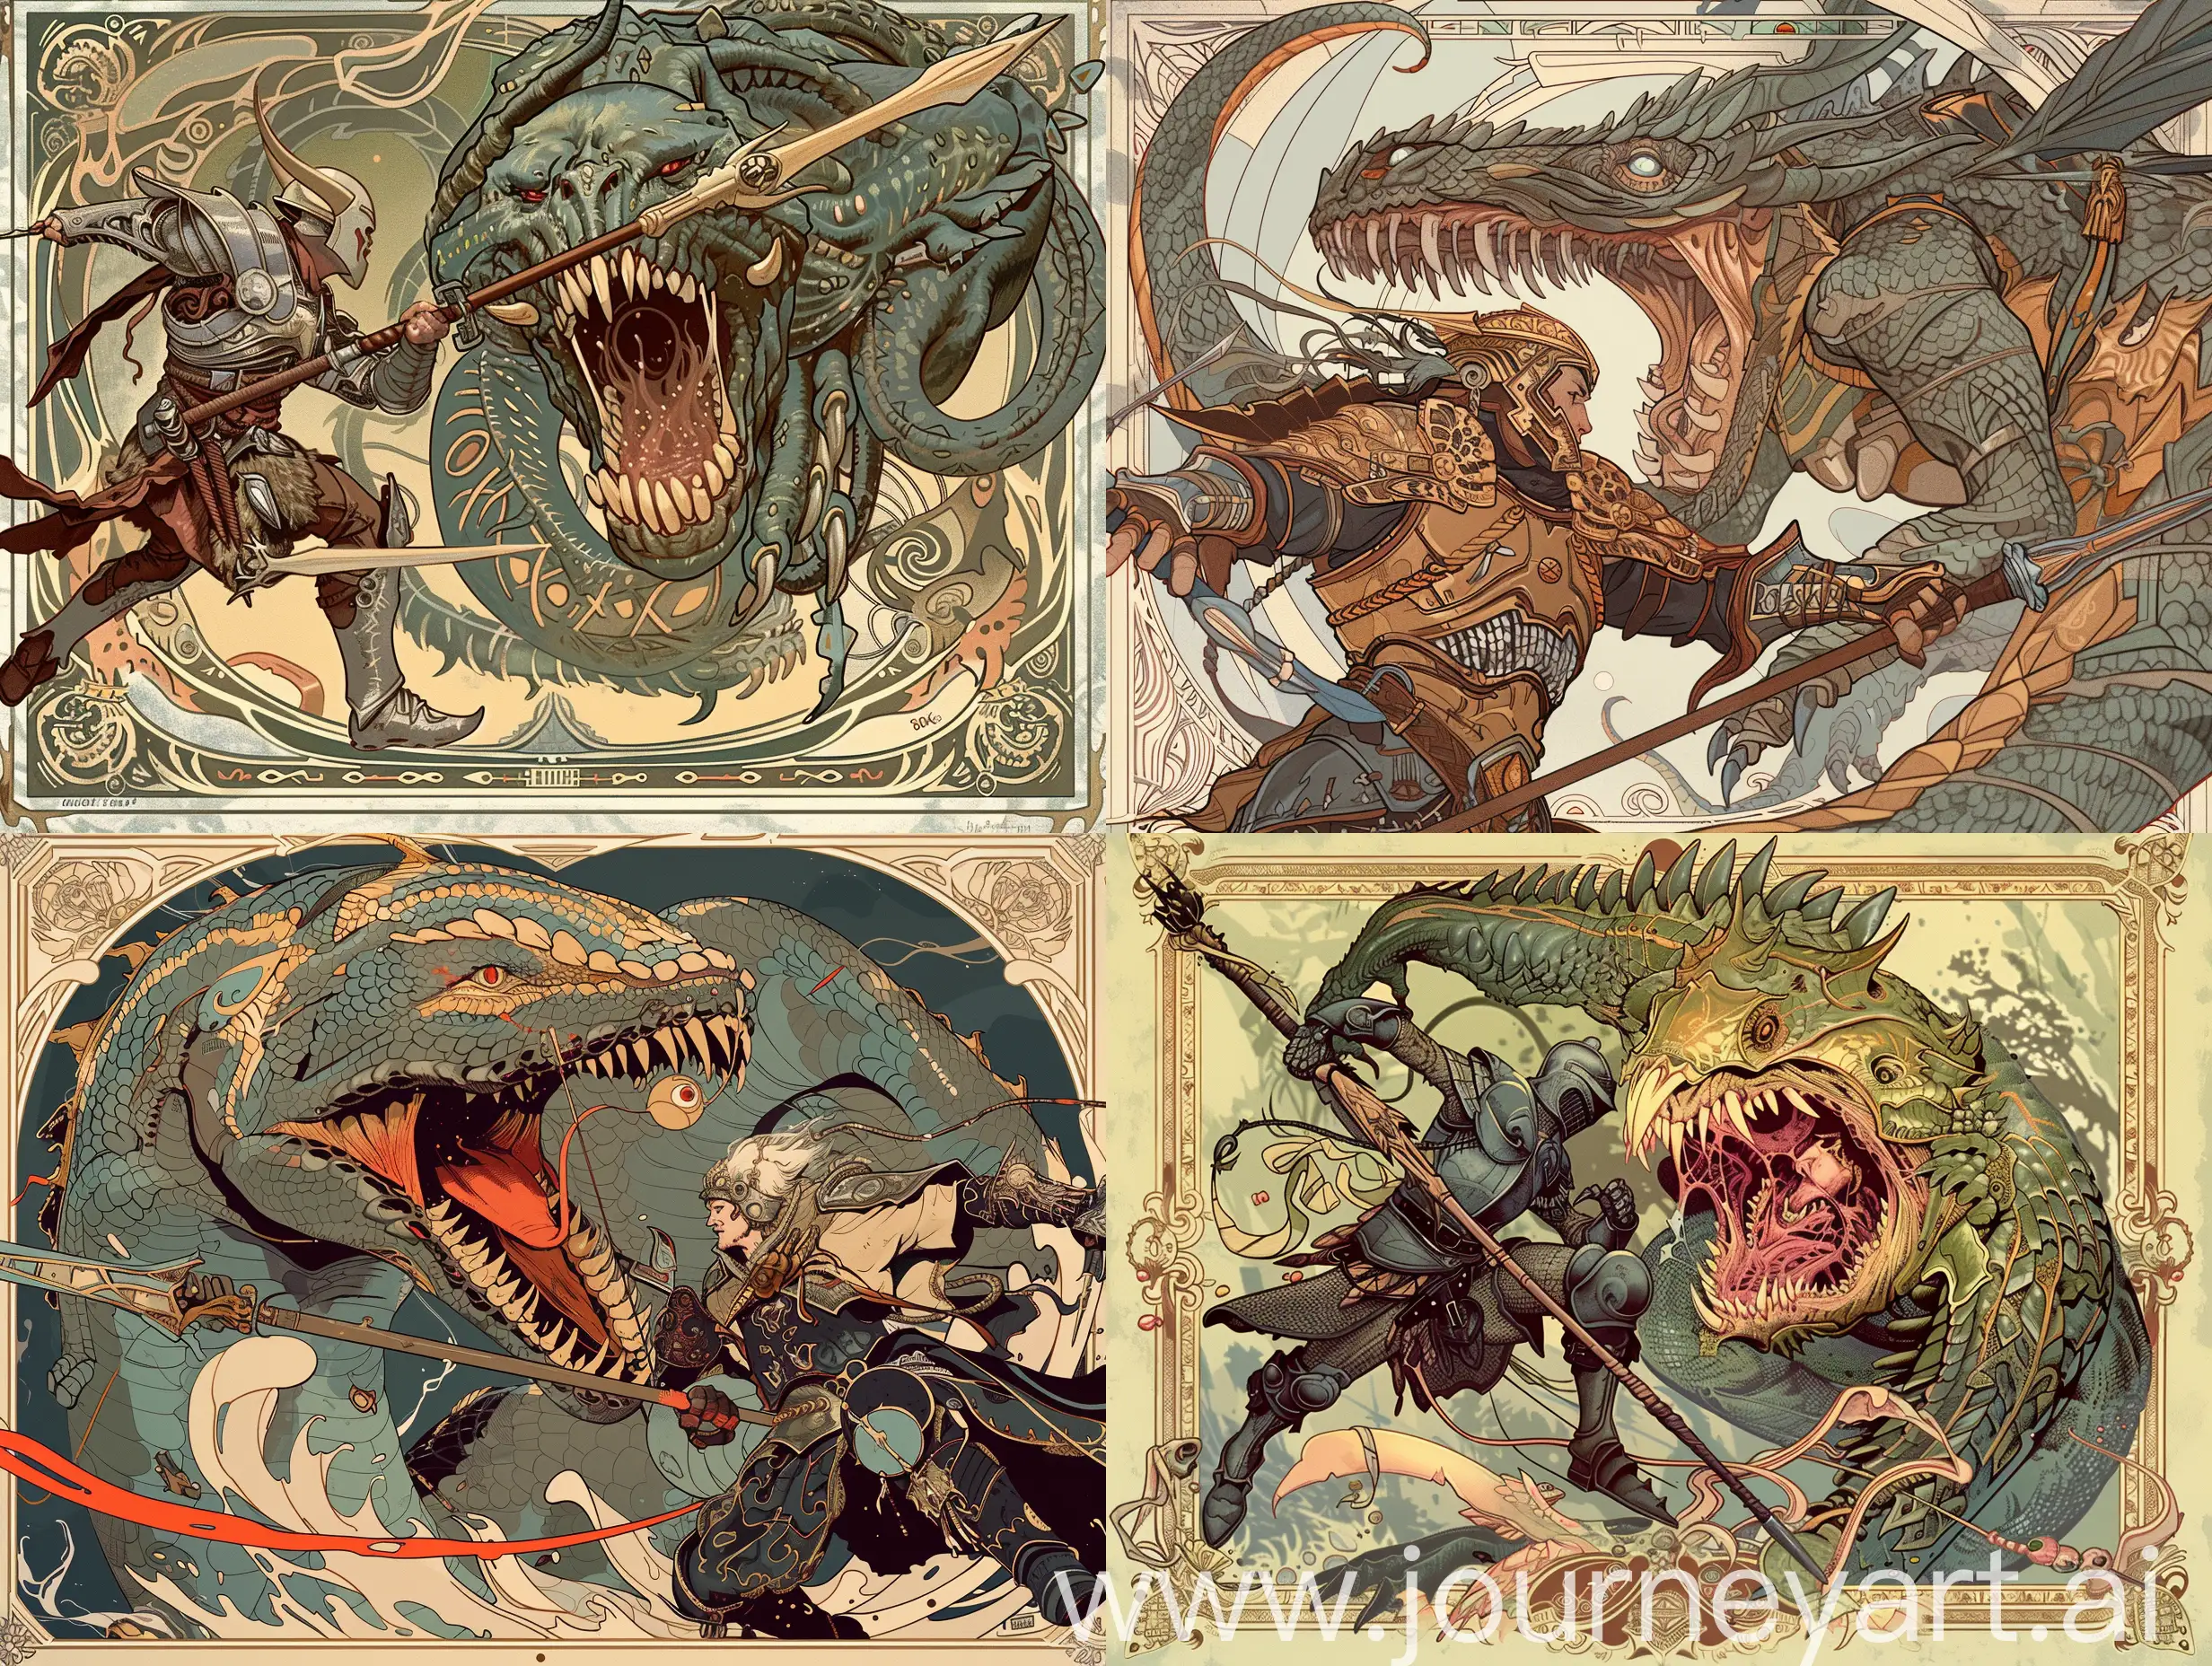 Epic-Battle-of-Armored-Warrior-Against-TwoHeaded-Monster-in-Art-Nouveau-Style